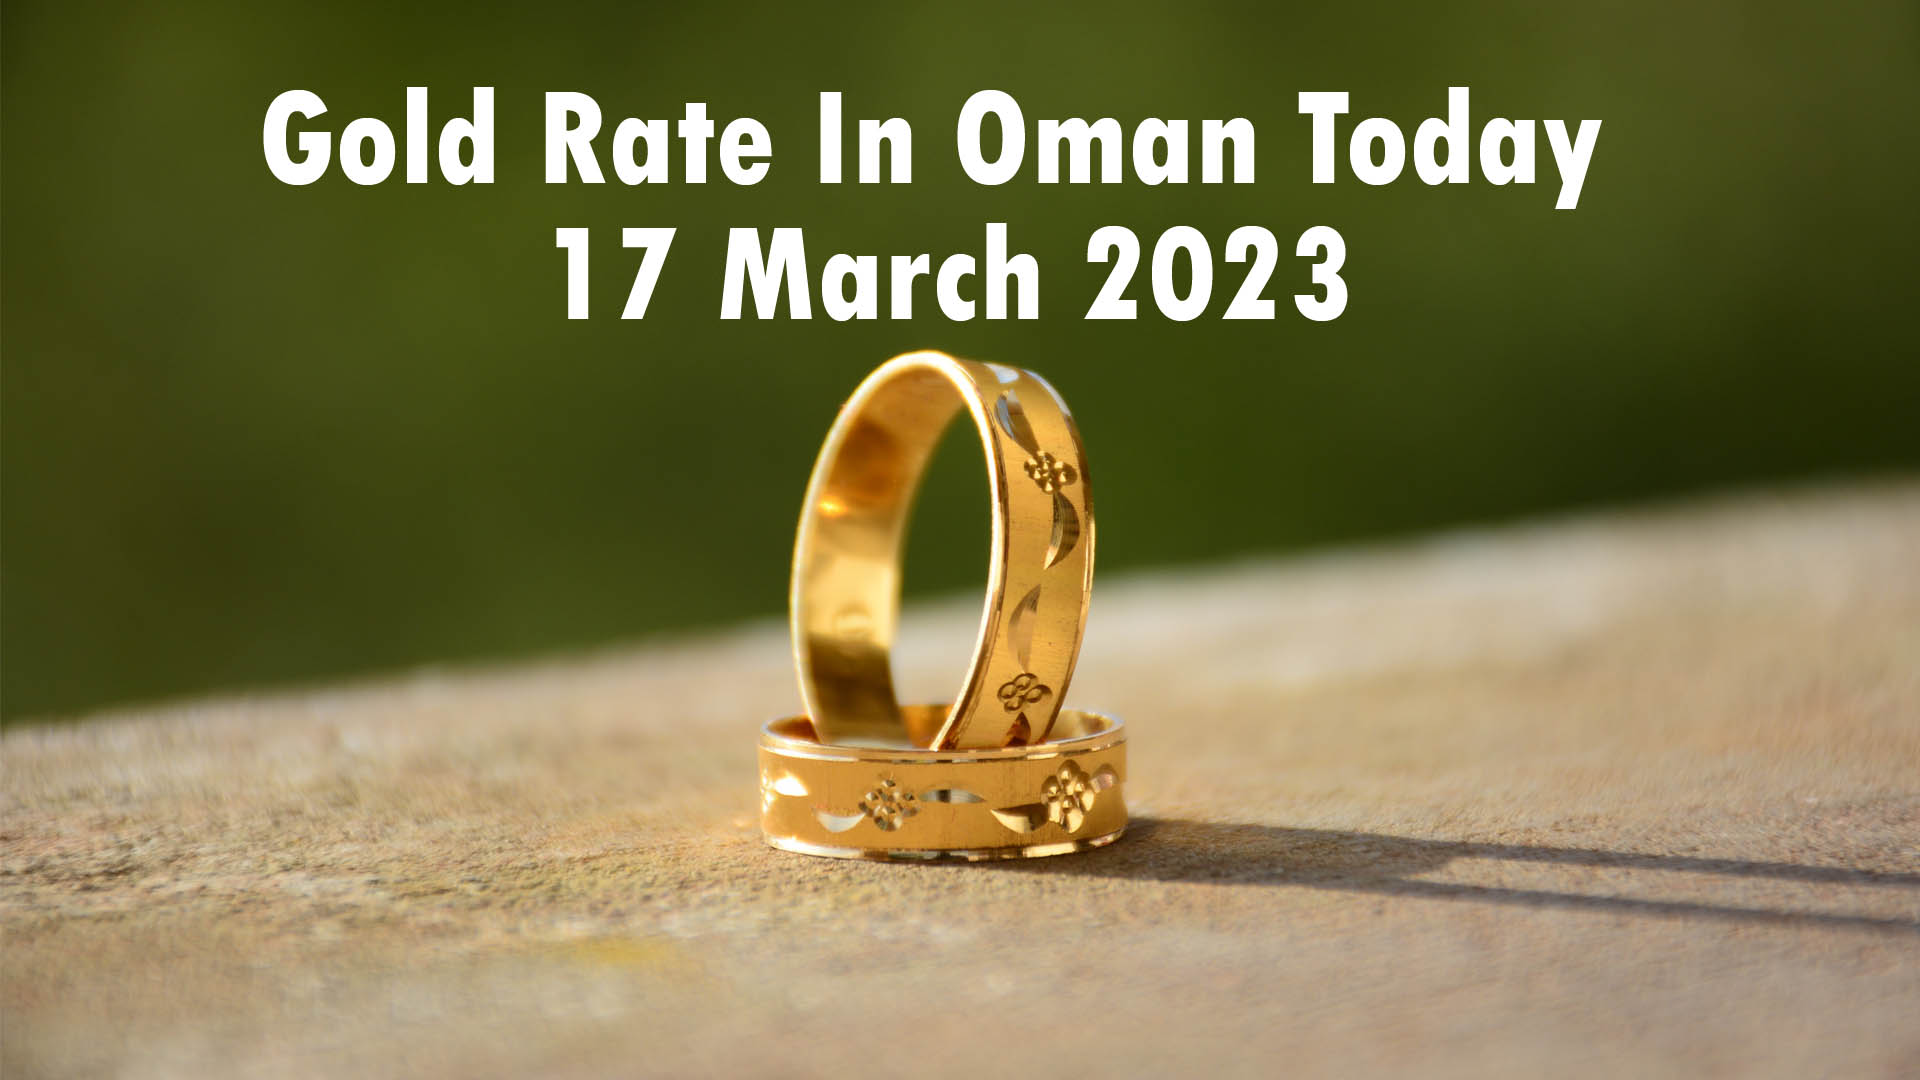 Gold Rate In Oman Today 17 March 2023